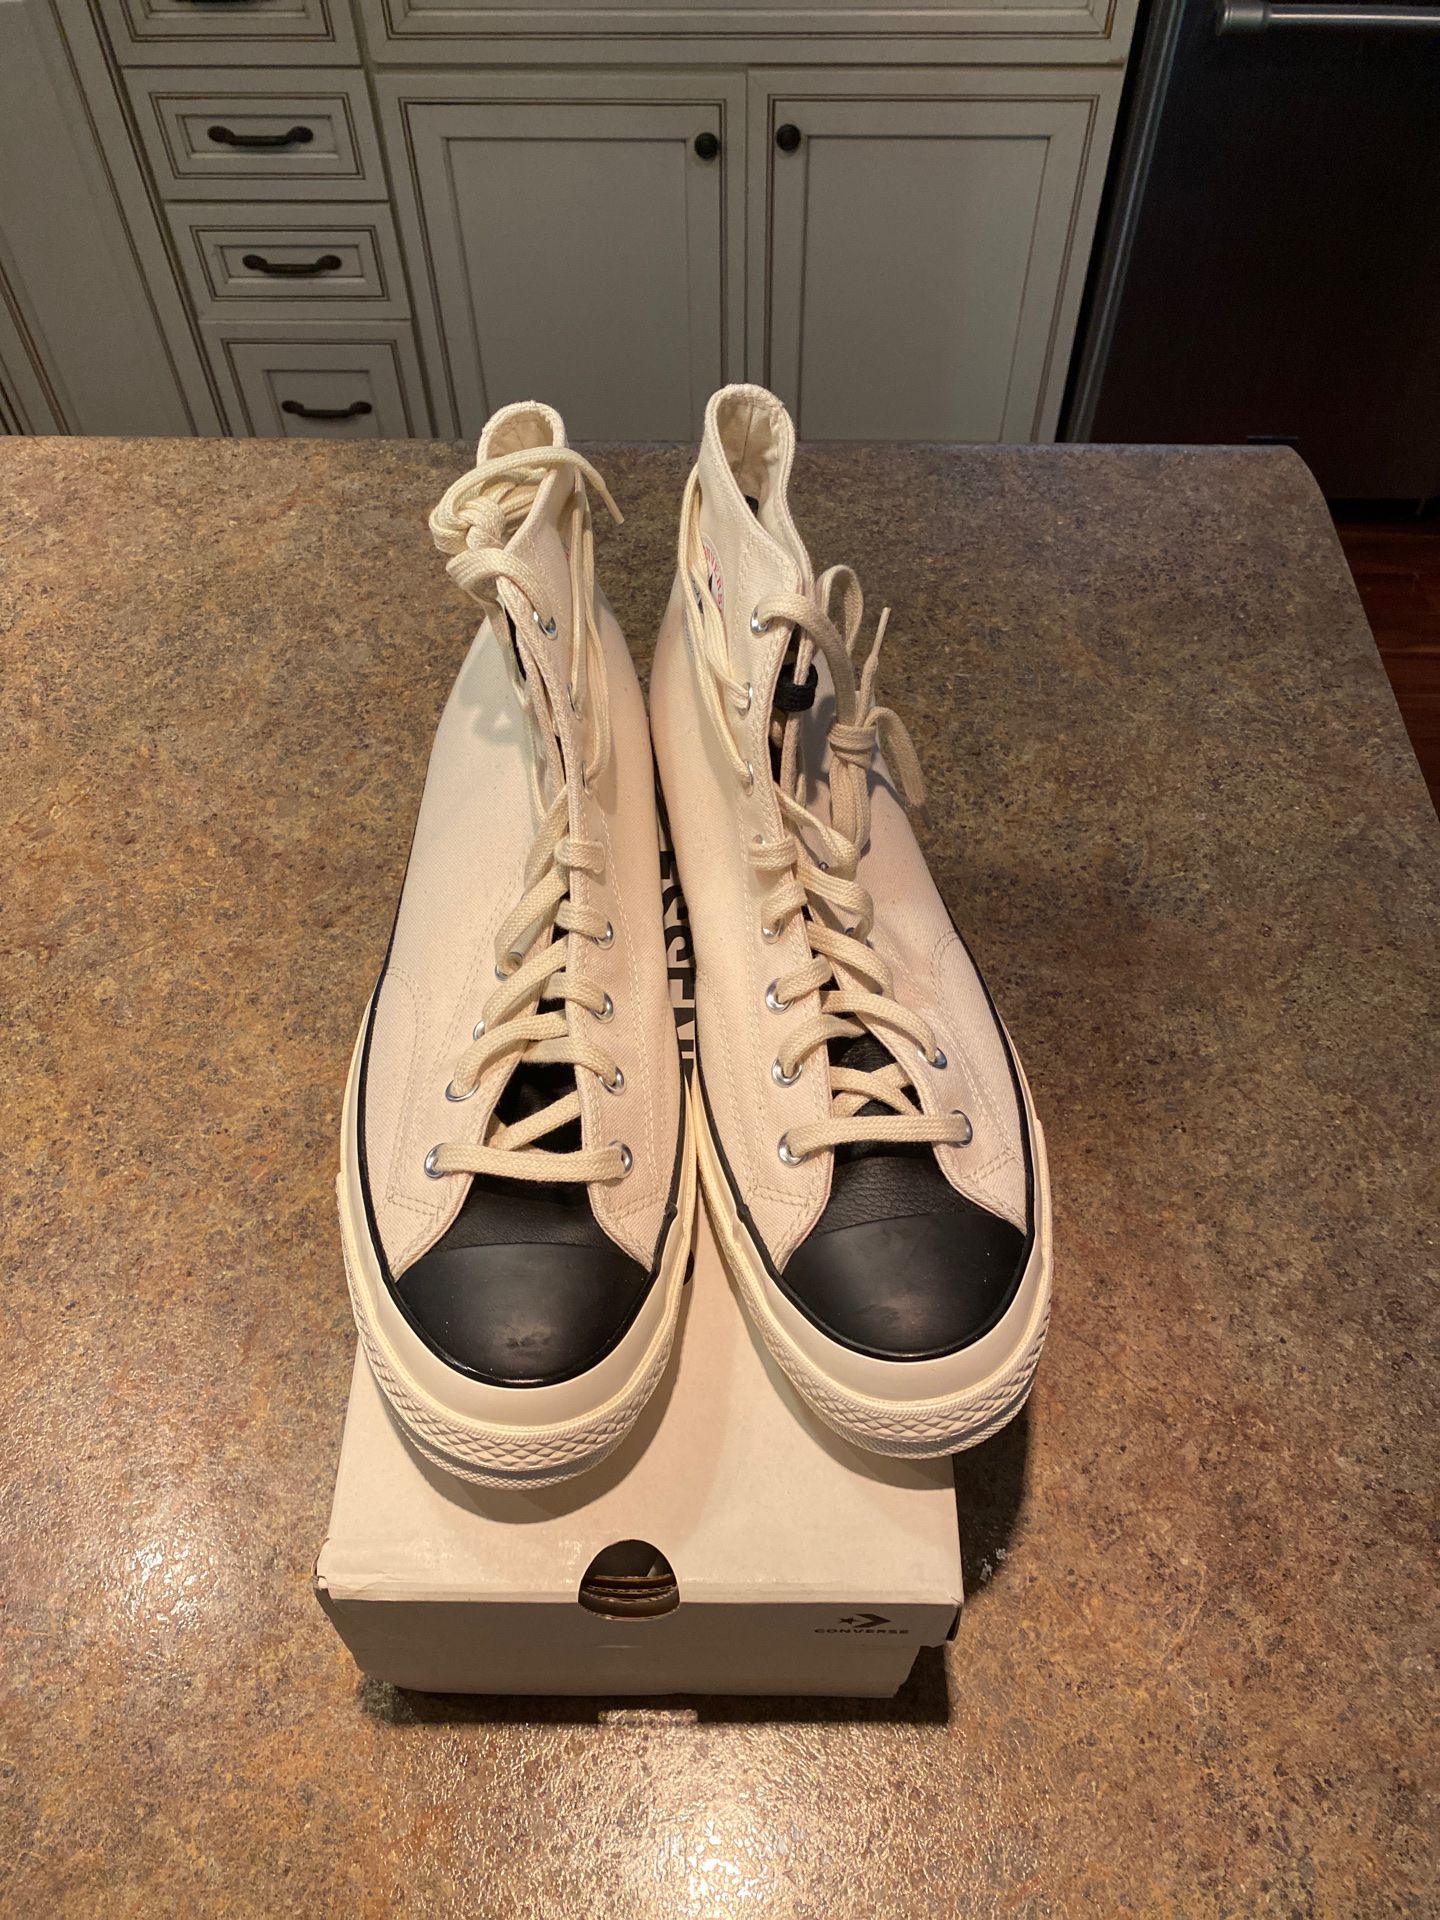 Fear of God Converse Size 13